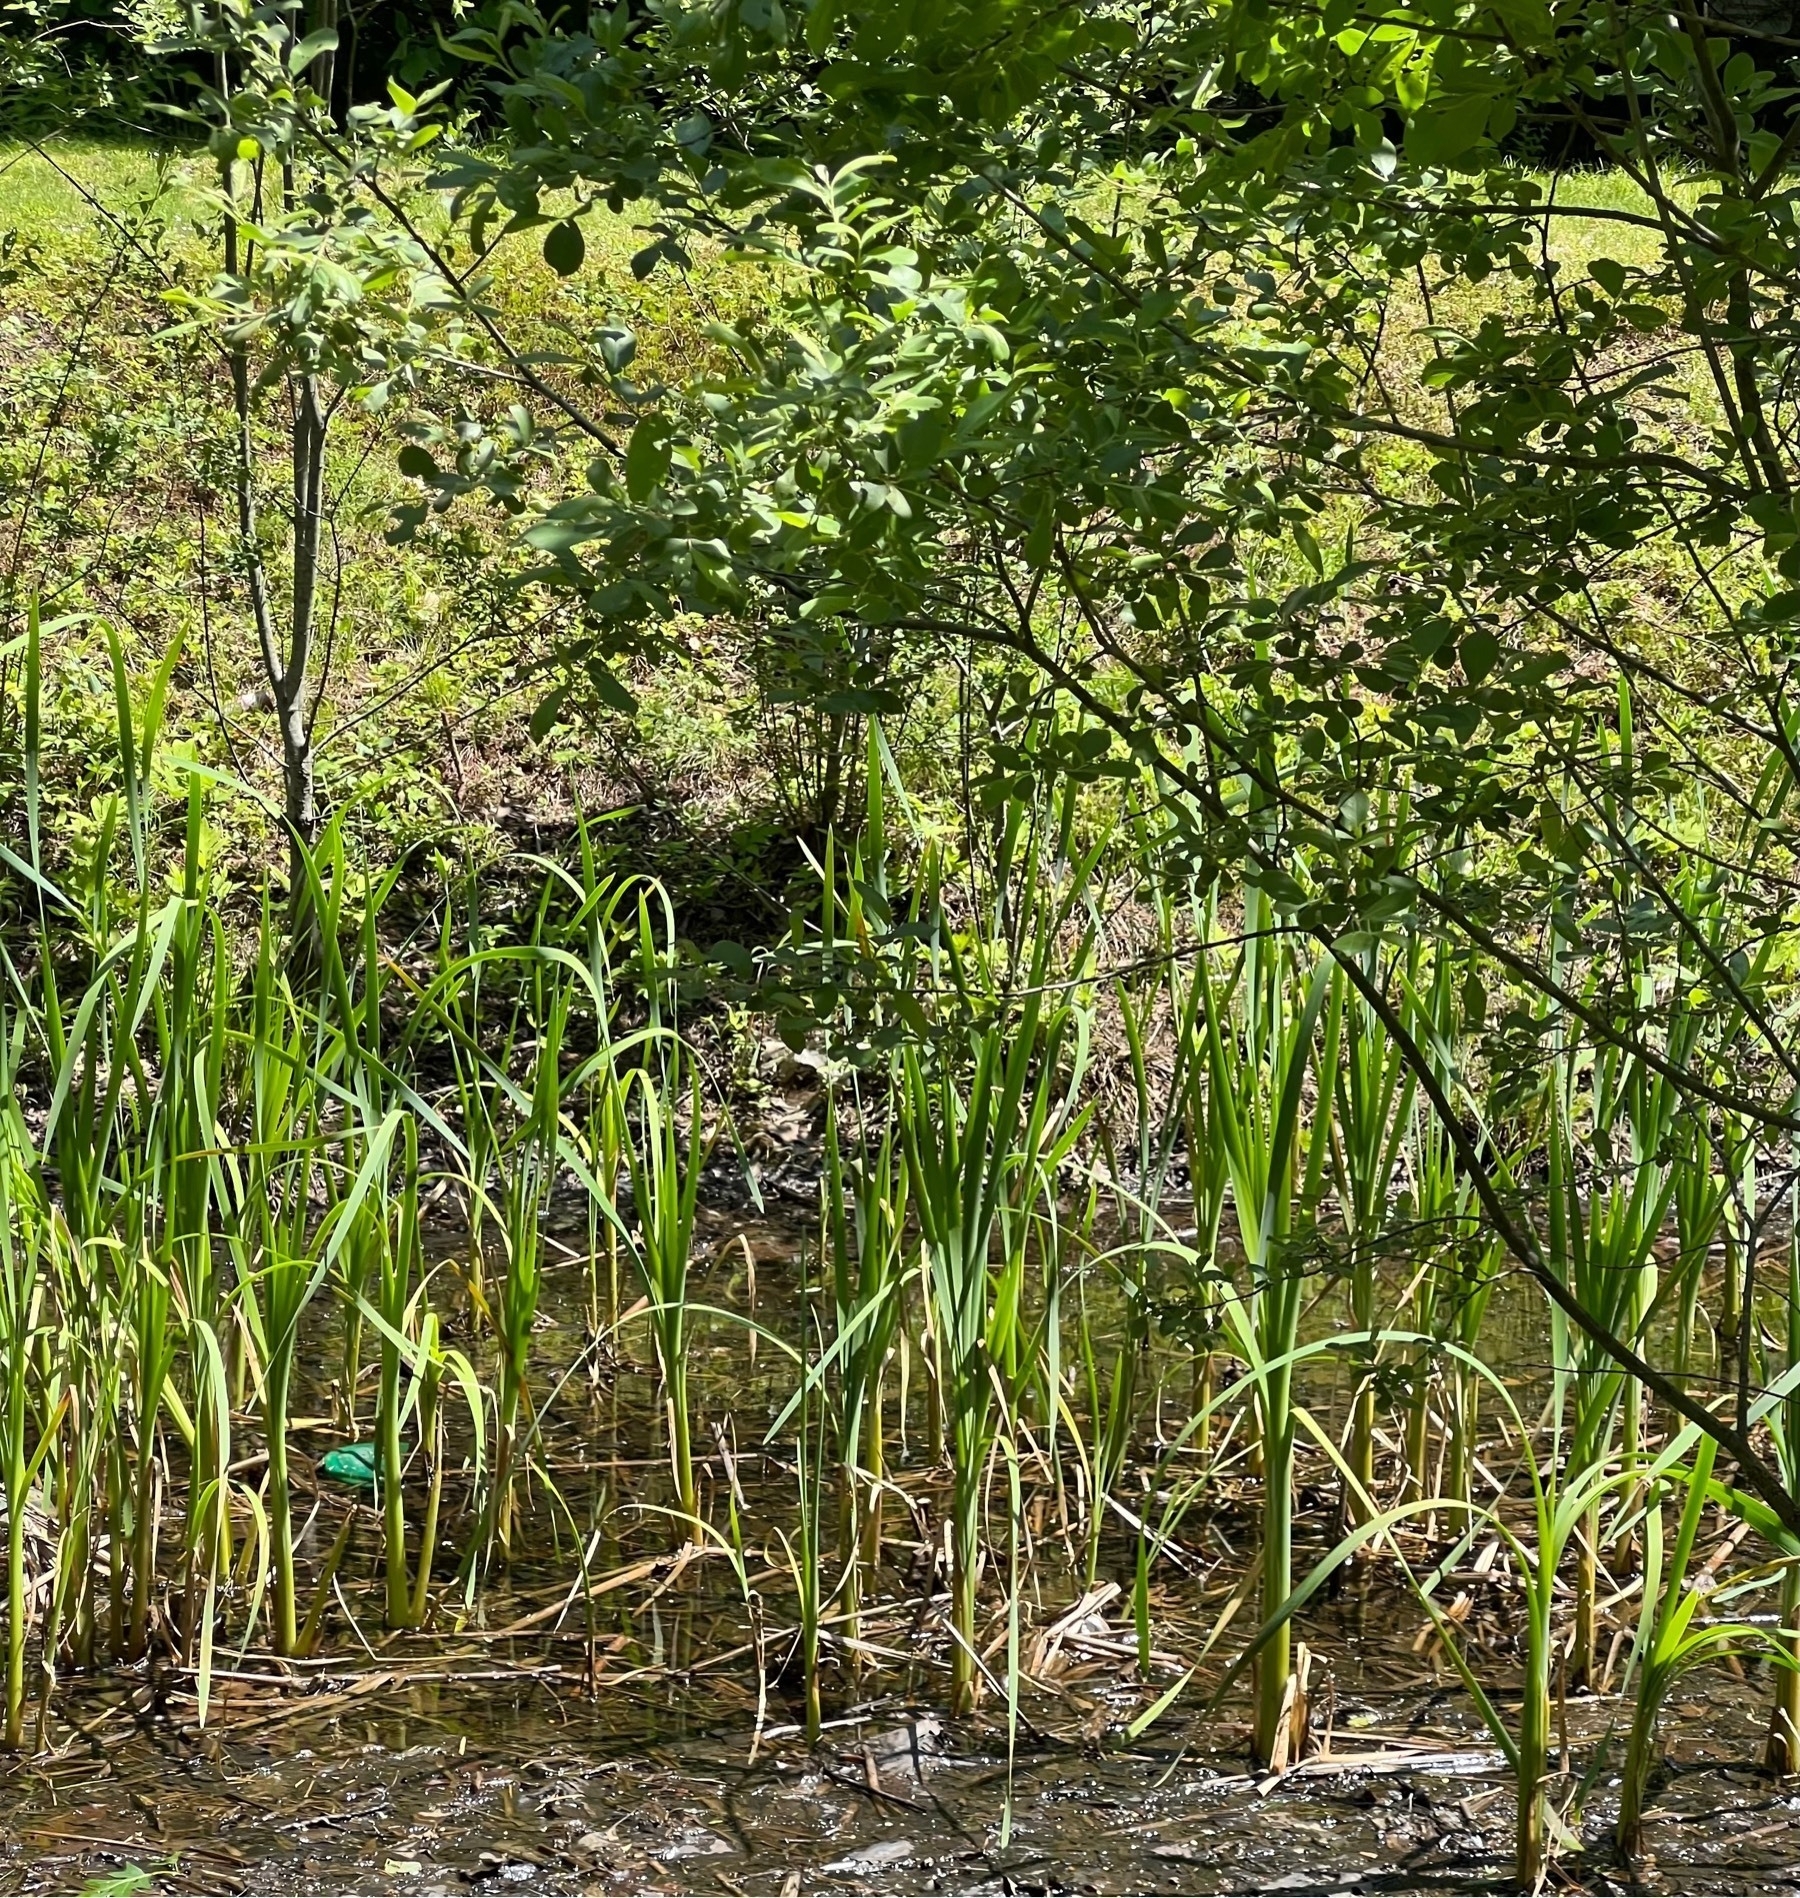 A marsh of green plants and water